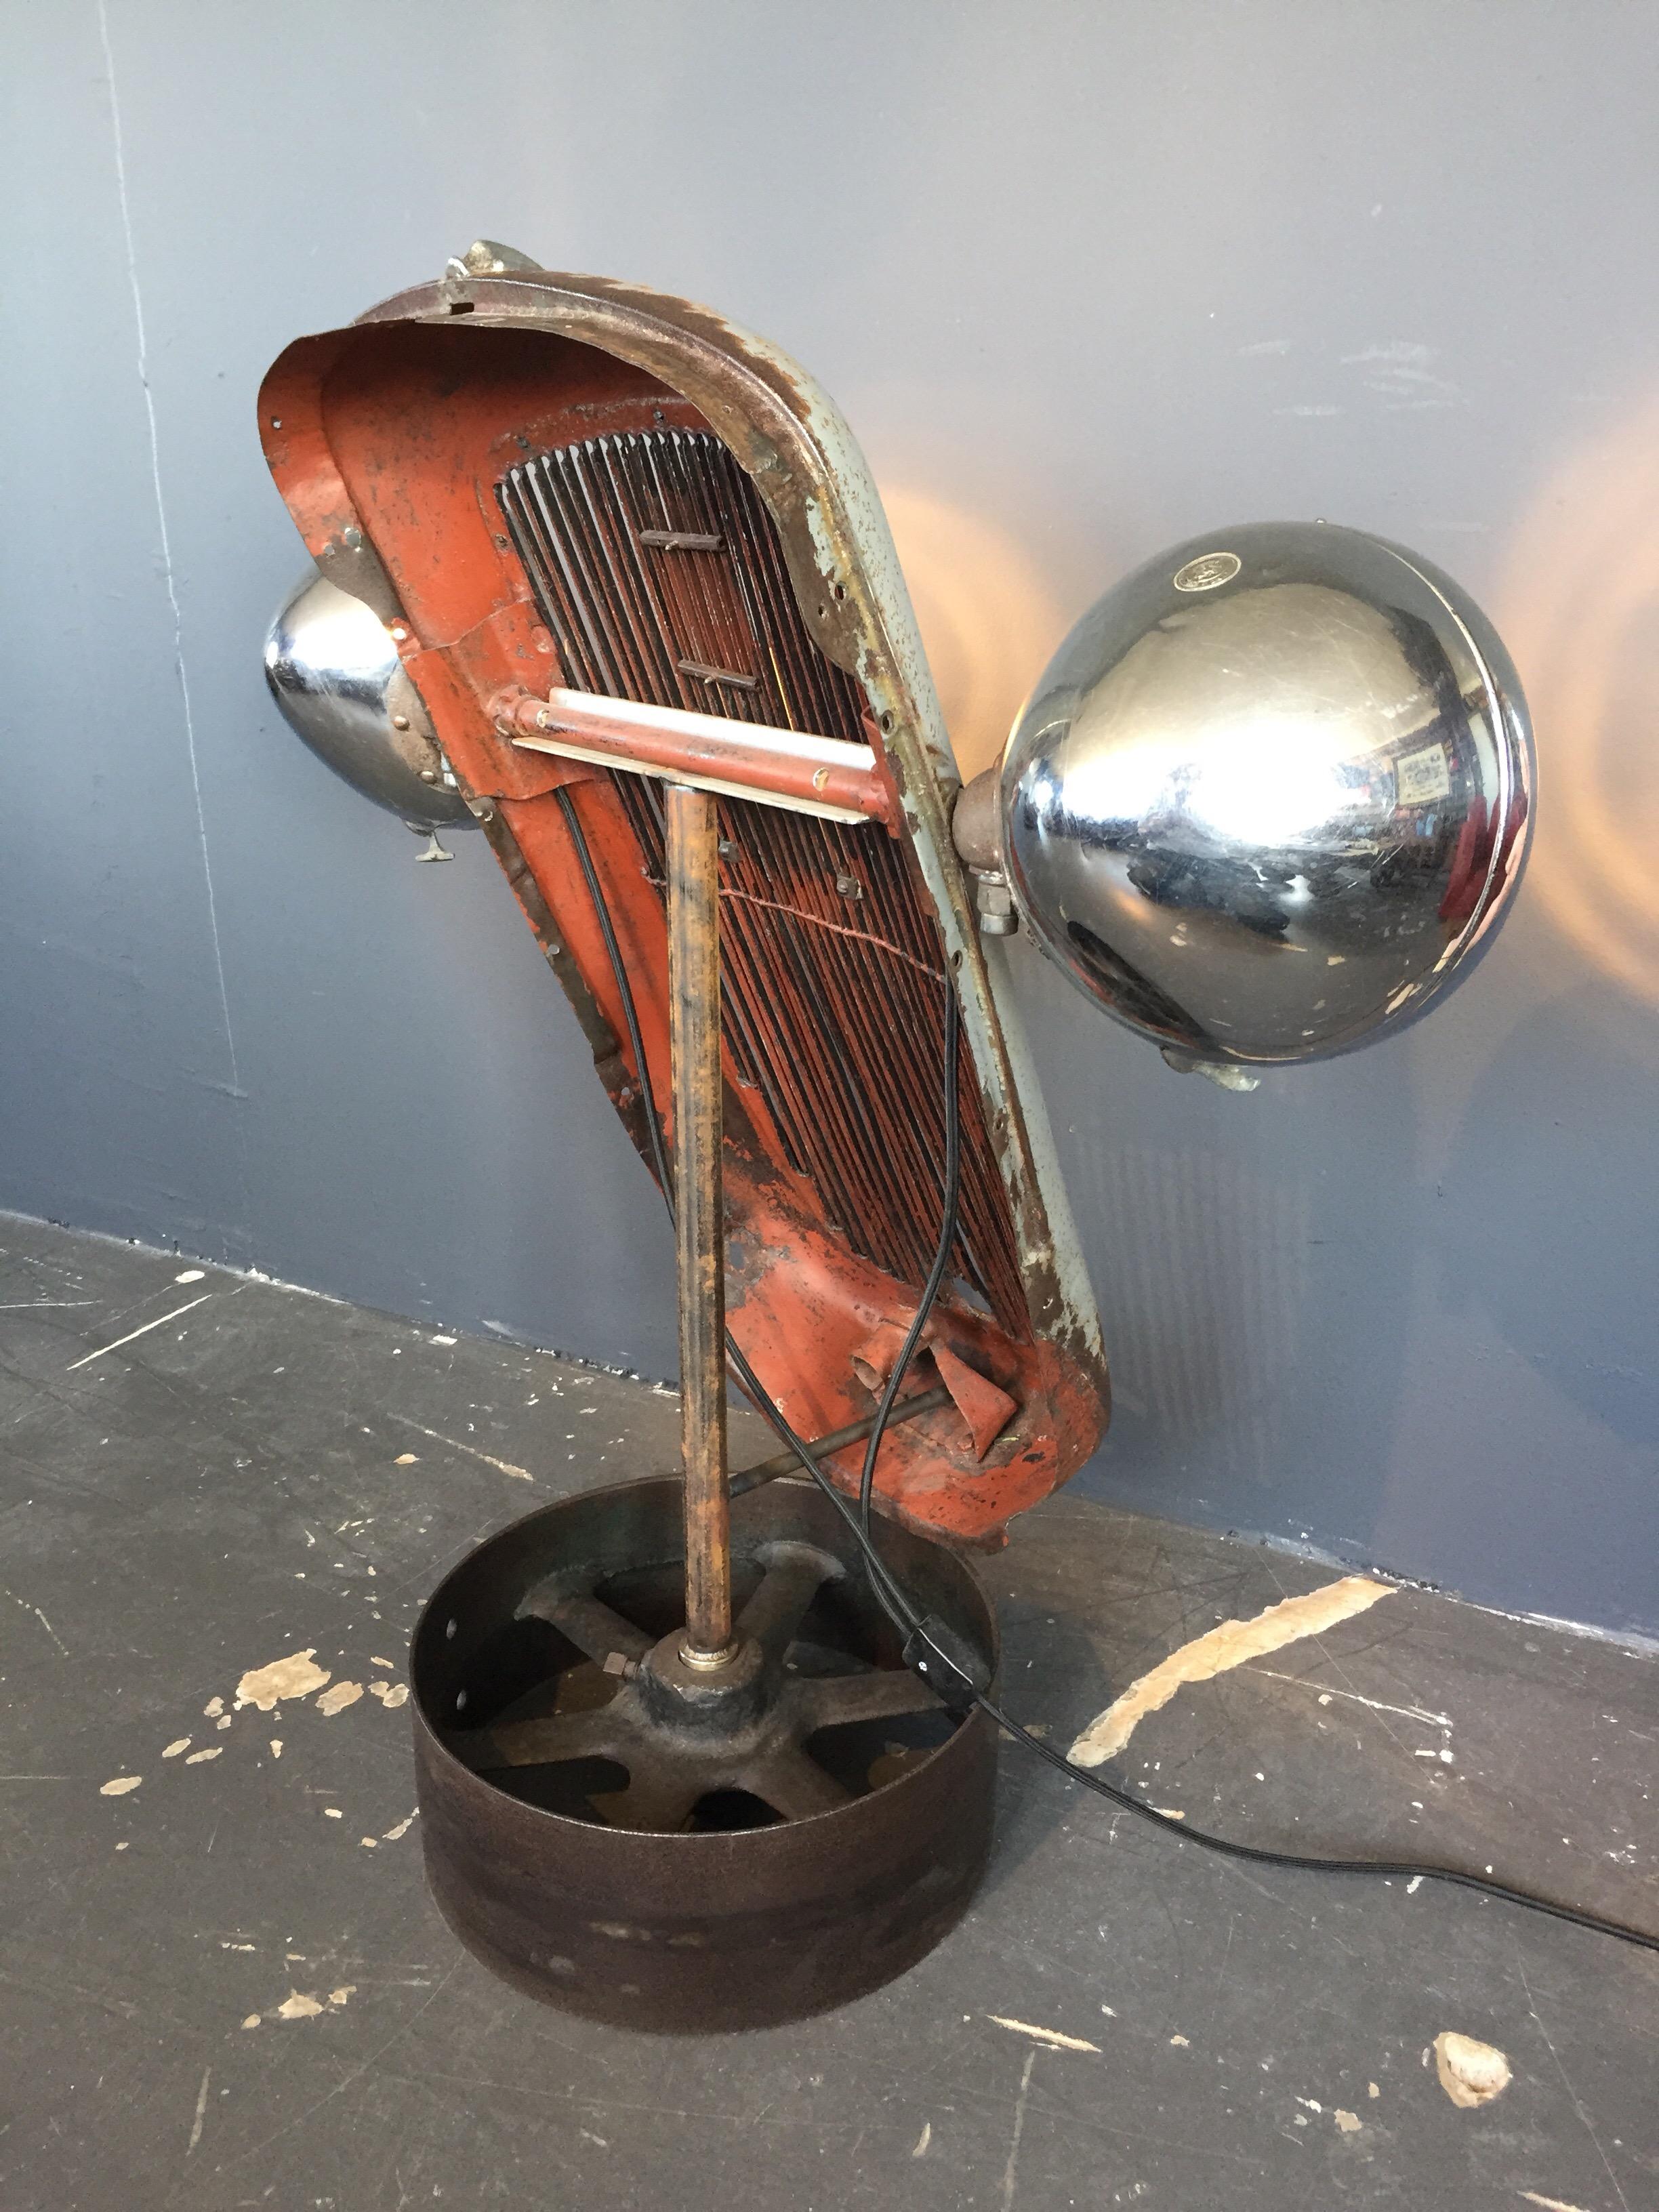 1930s Austin 10 Grille with Lucas King of the road head lights.
Mounted onto a cast iron base and converted with LED lights.
Original paint and with an overall great patina to the paint, brass and iron.
Can be fitted with an EU UK or US electrical